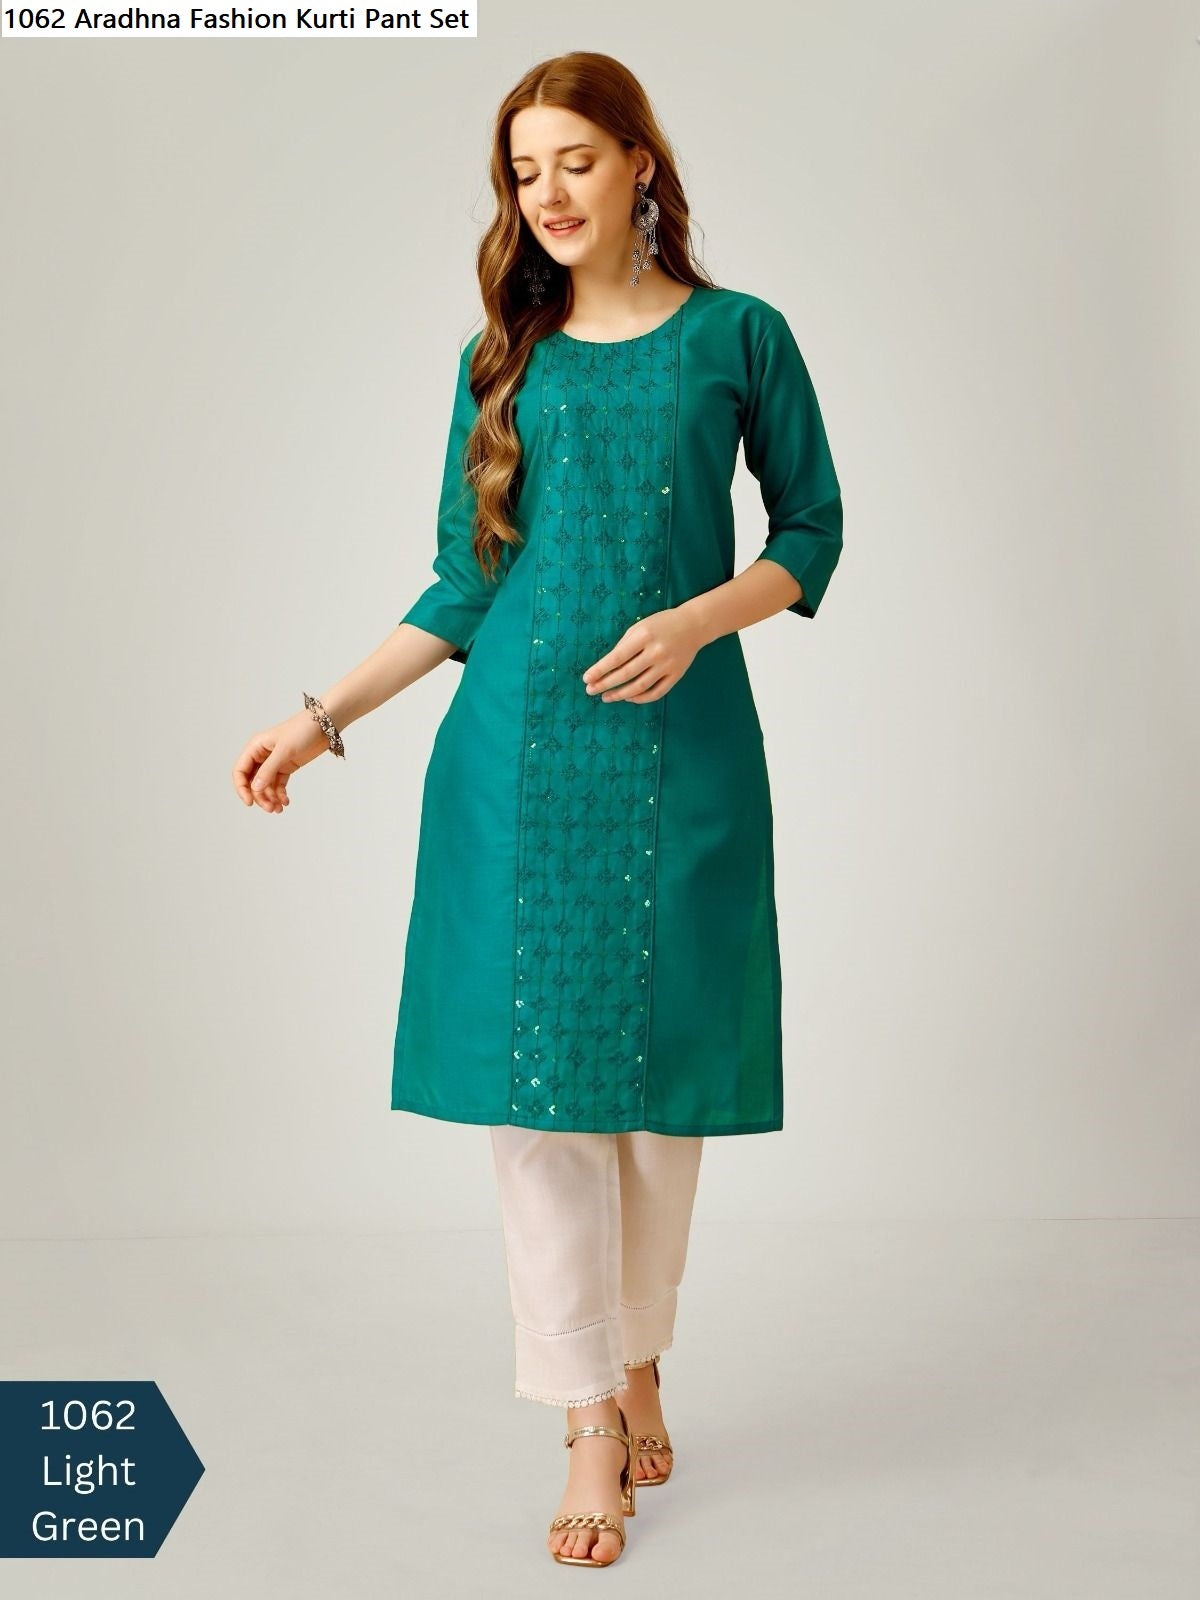 Inddus Sea Green Embroidered Kurti Pant Set With Dupatta Price in India,  Full Specifications & Offers | DTashion.com